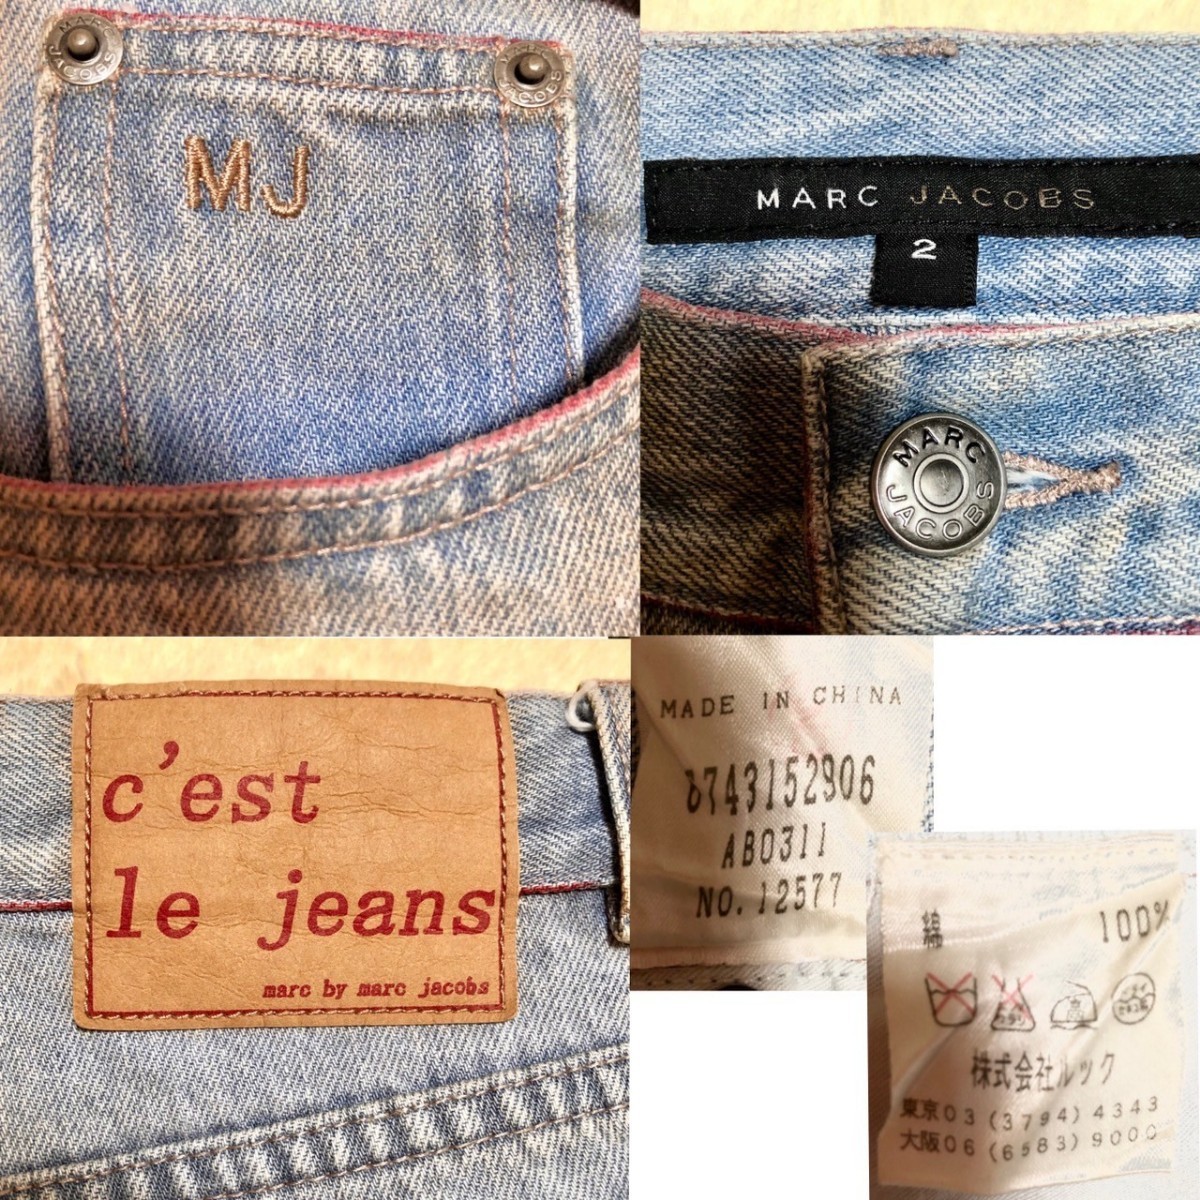  Mark Jacobs MARC JACOBSteni.m light blue pink stitch damage processing is dirty . processing jeans ji- bread Vintage 2 size M